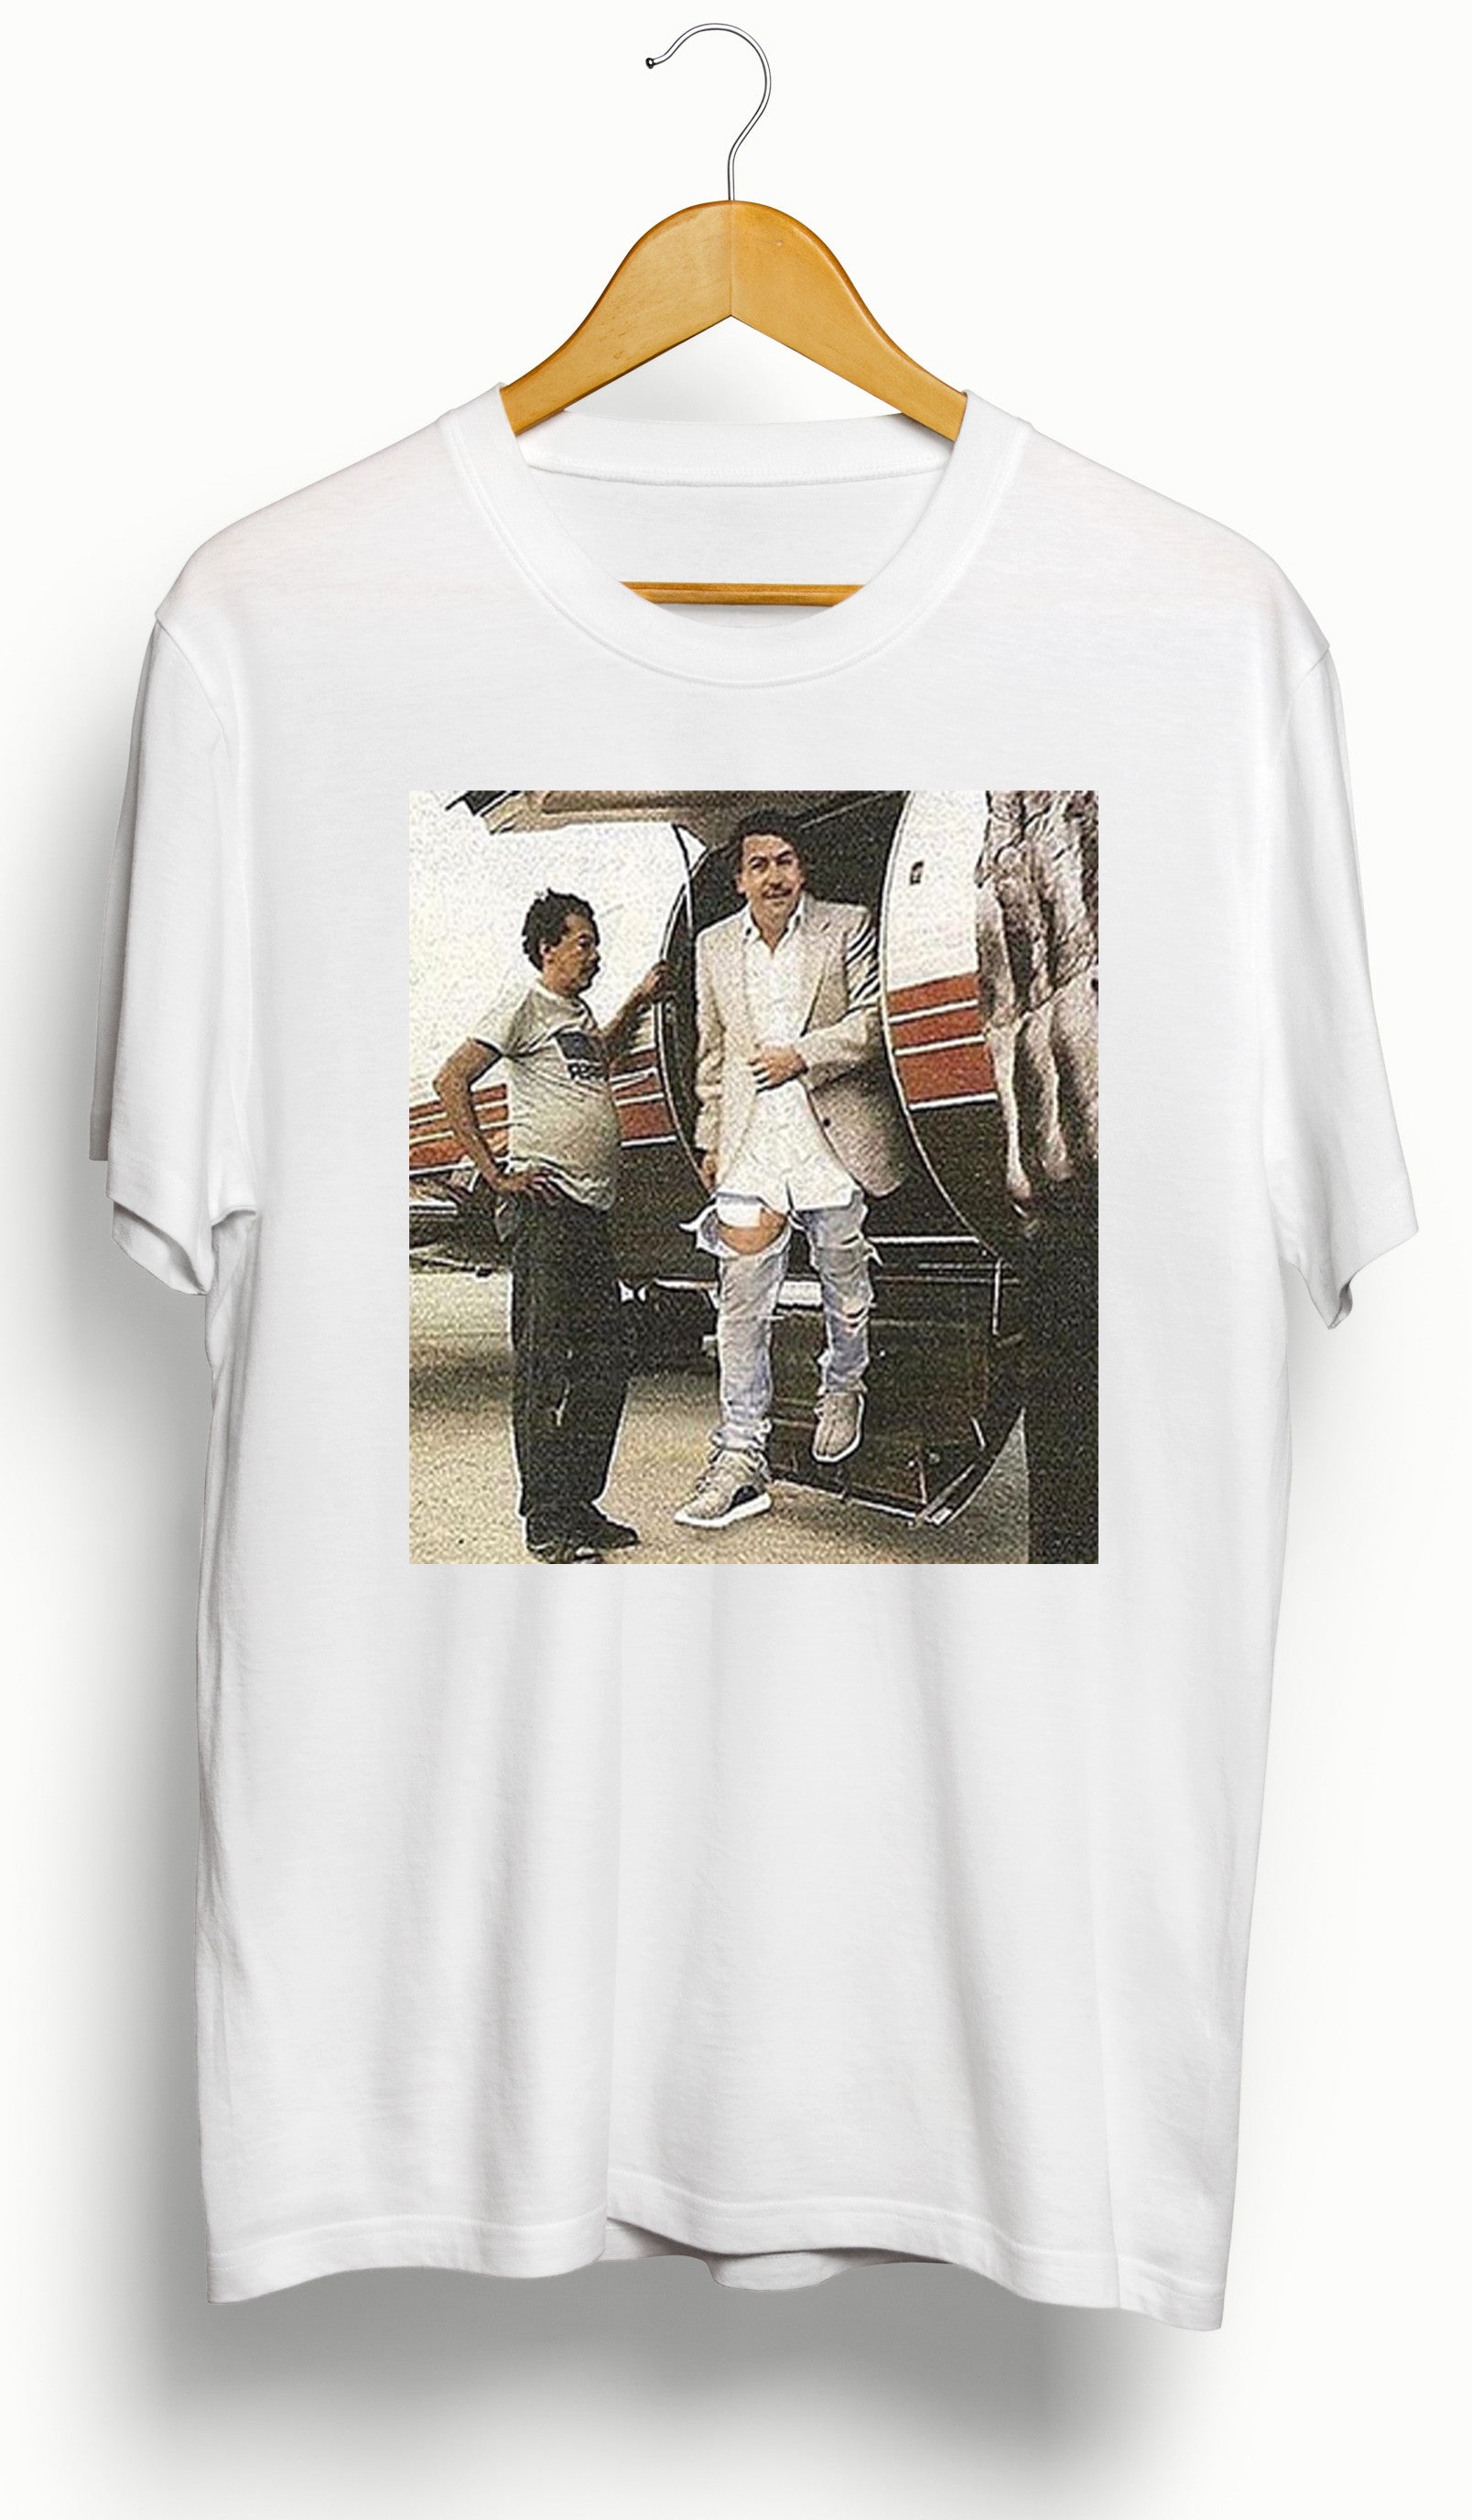 The Life of Pablo T-Shirt - Ourt